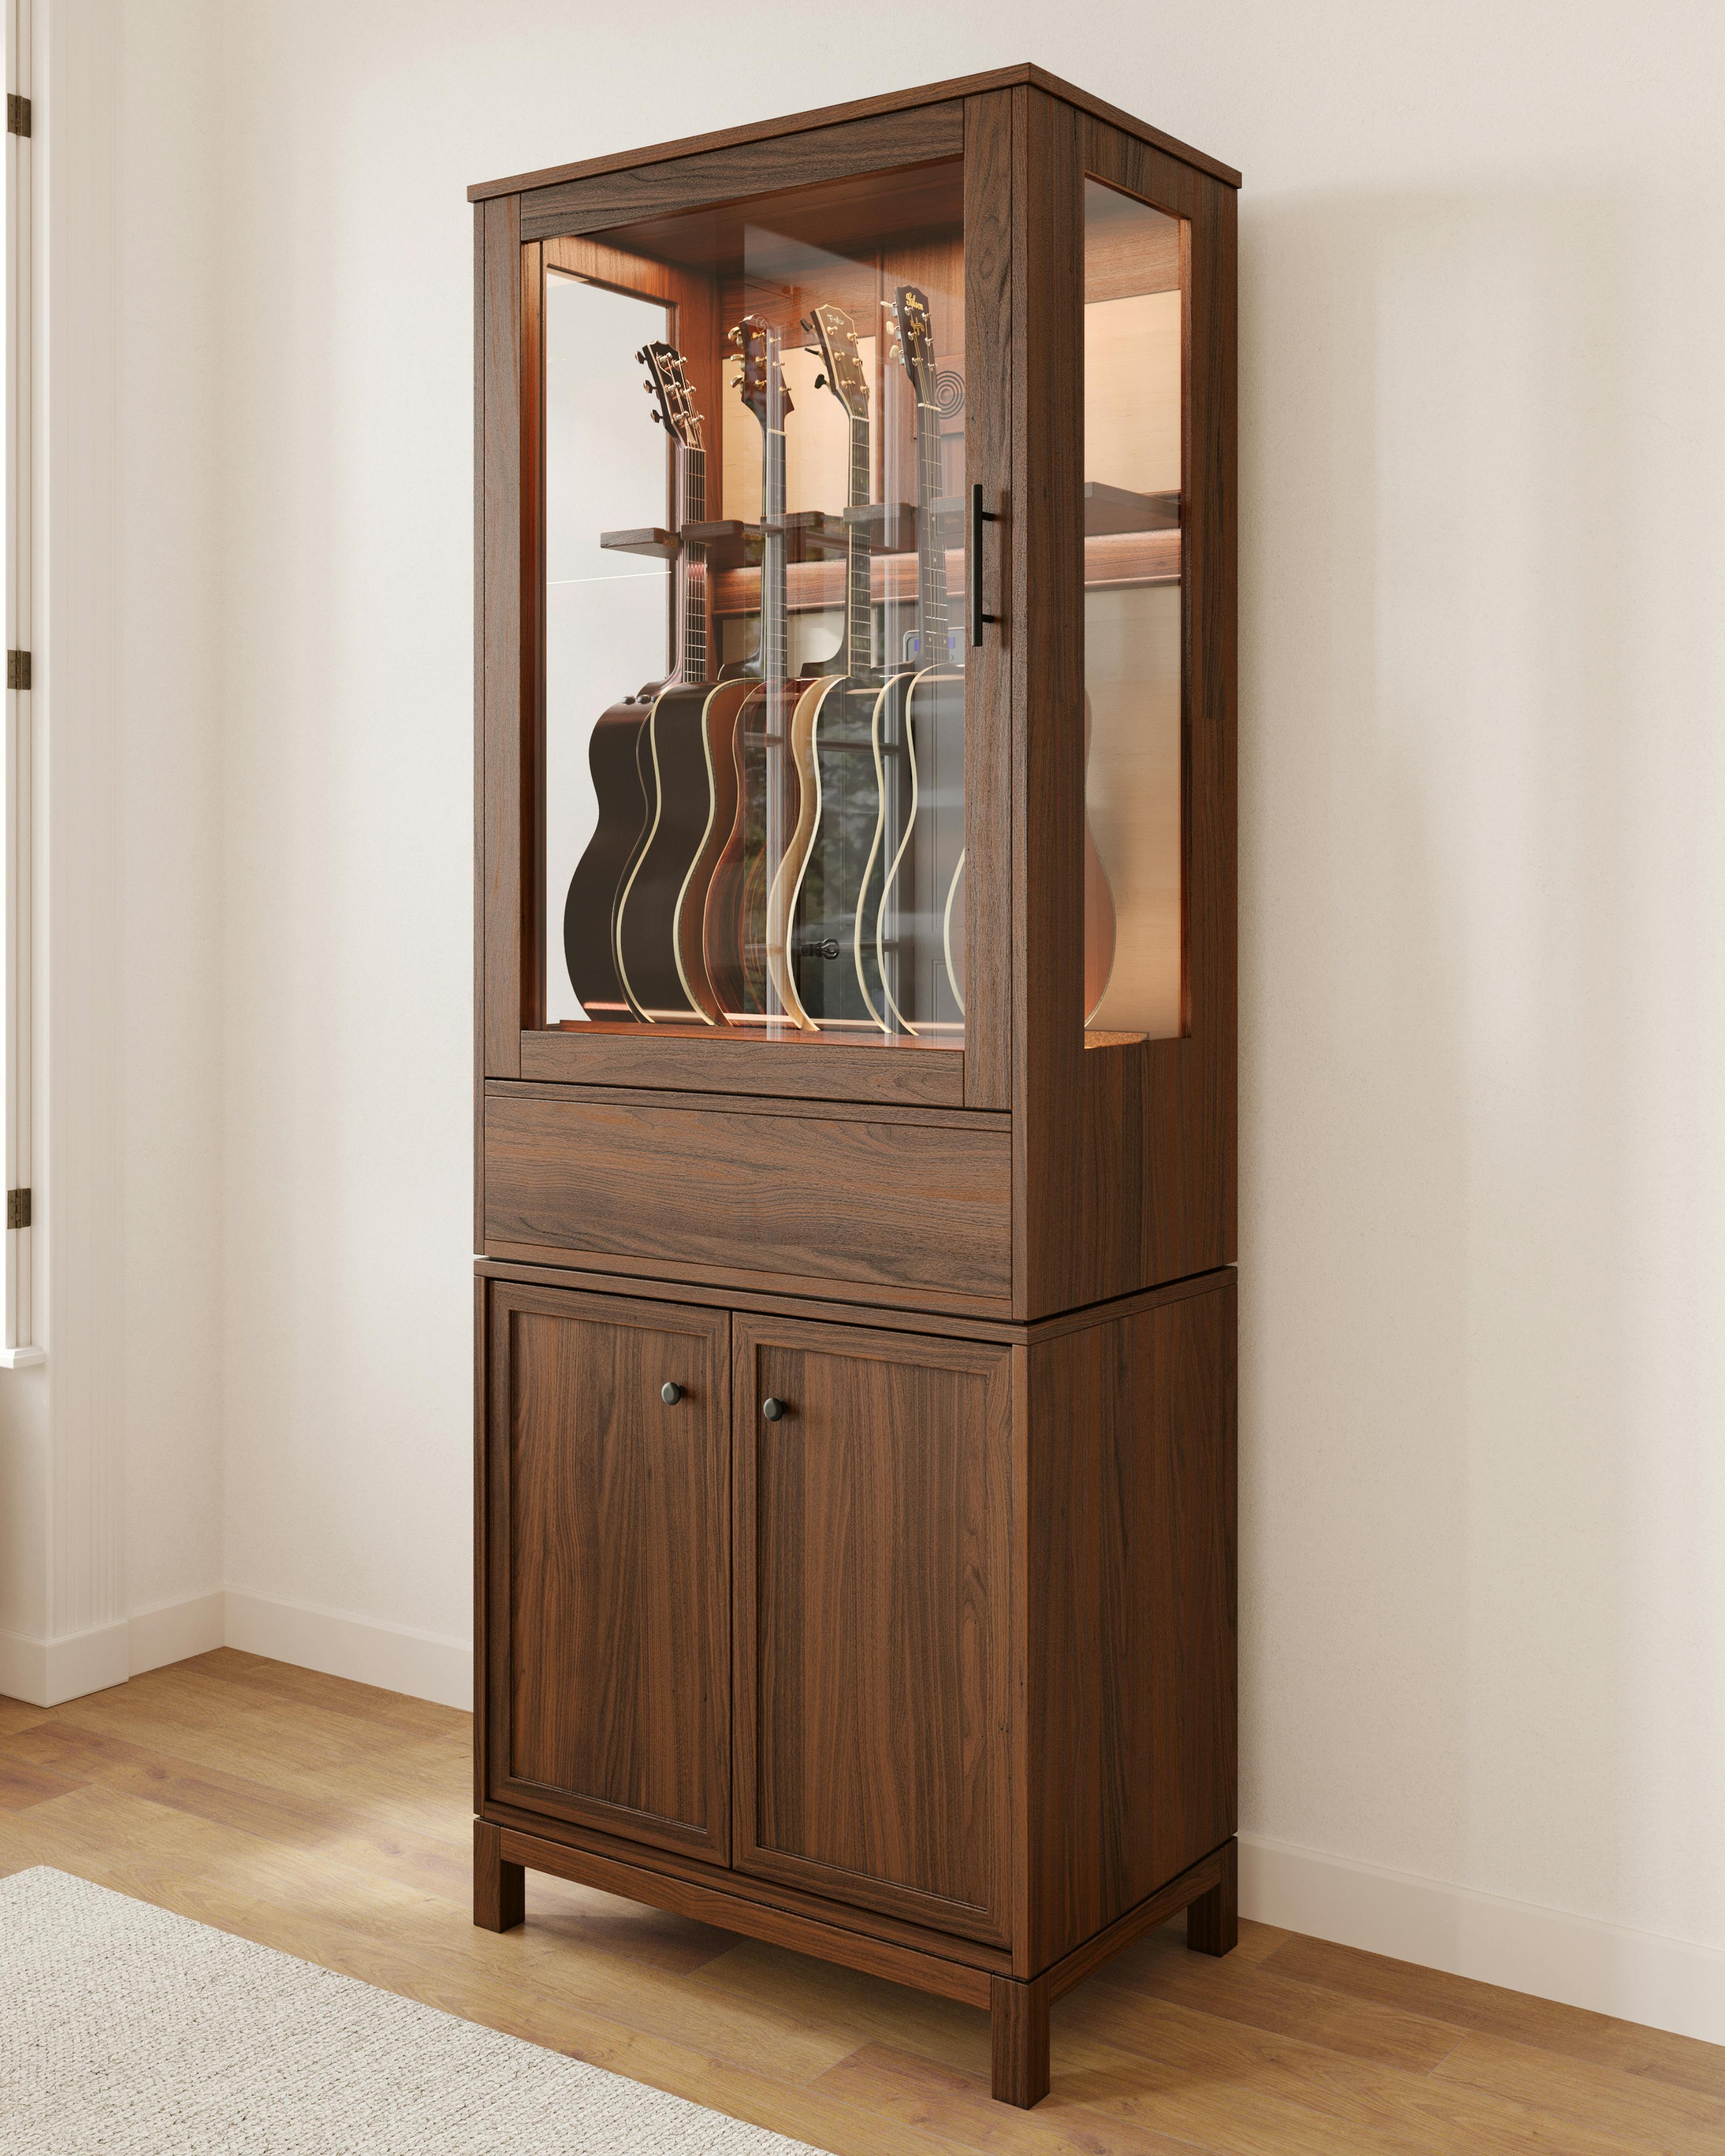 american music furniture climate controlled guitar cabinet display with music gear storage